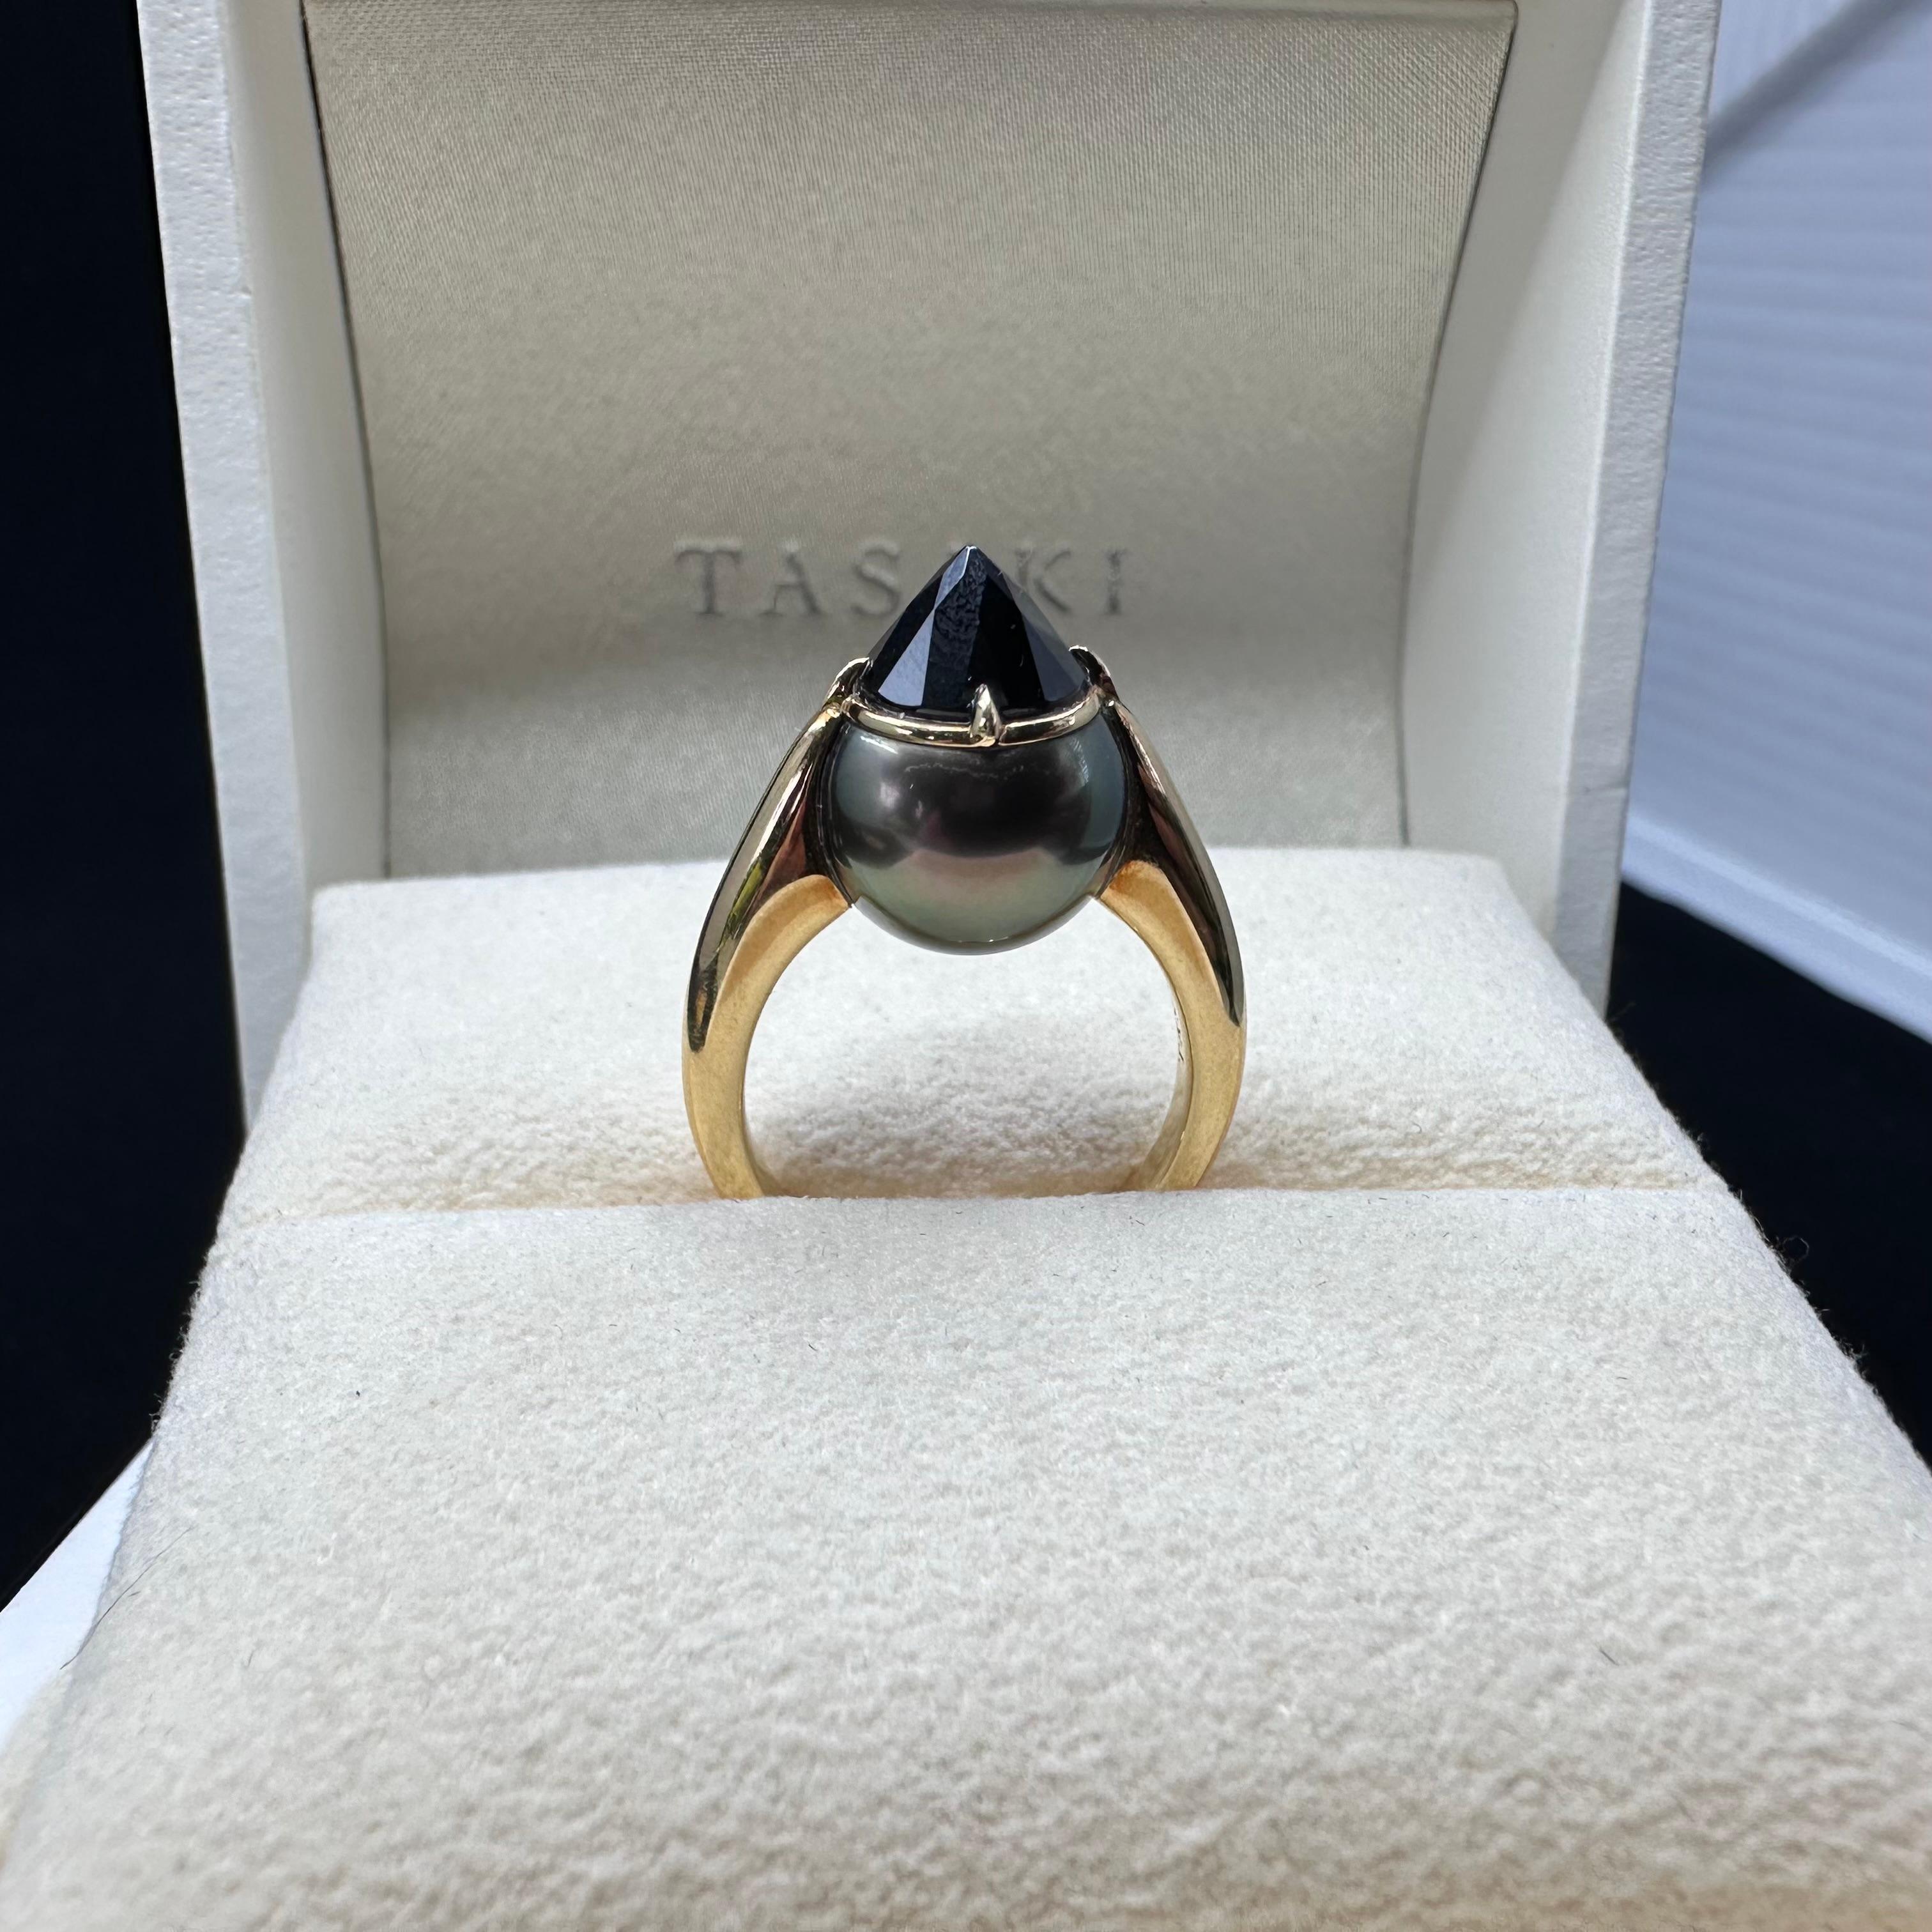 Tasaki Black Spinel and South Sea Pearl Ring  For Sale 1